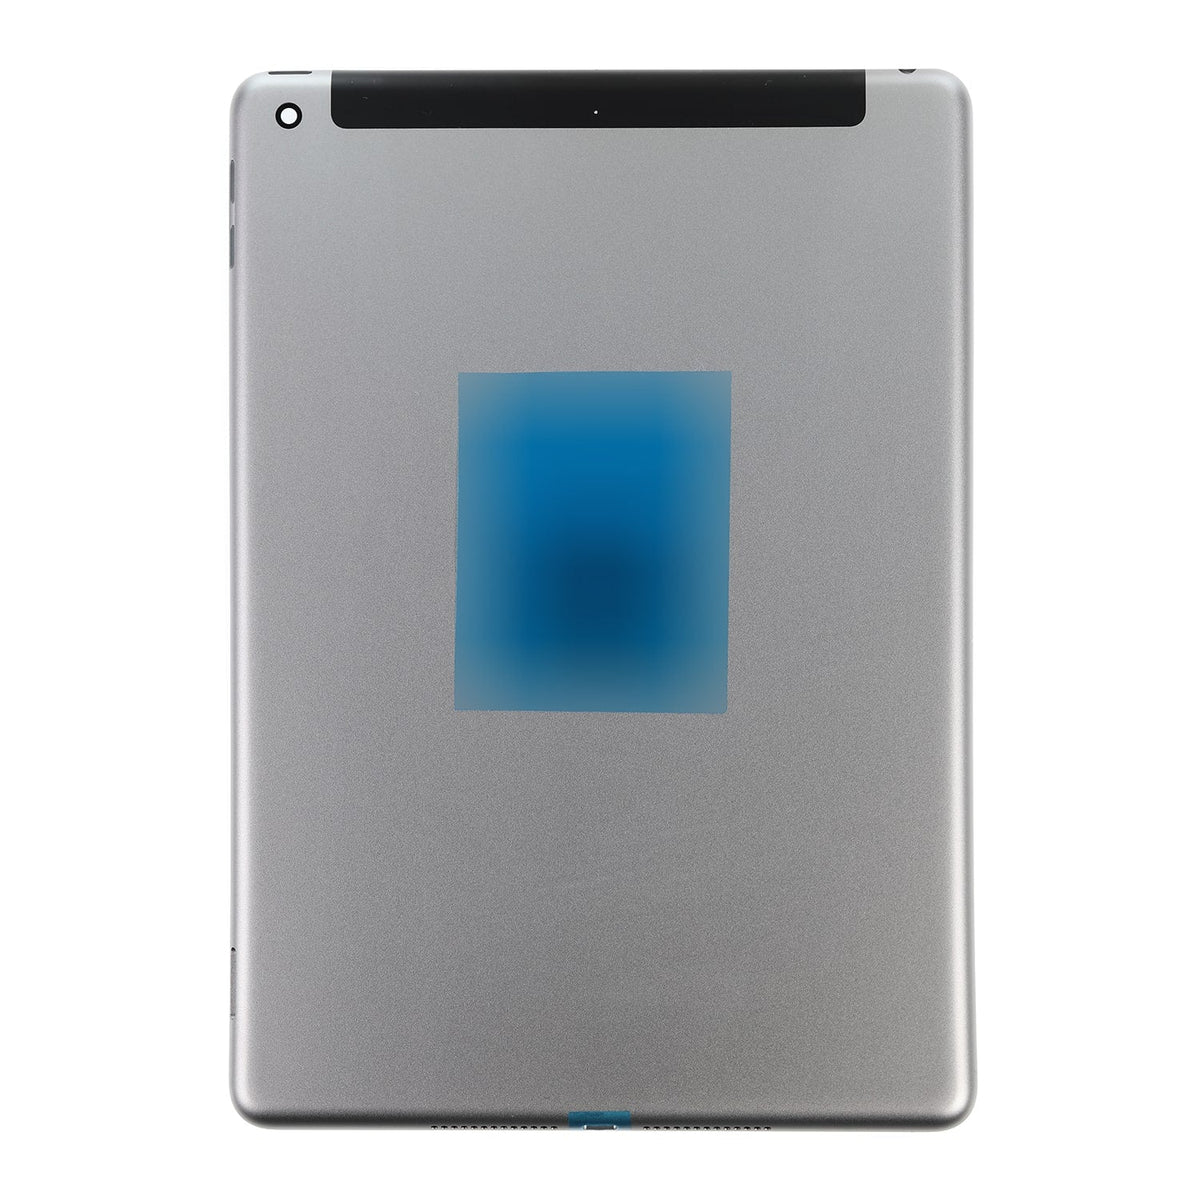 GREY BACK COVER (4G VERSION ) FOR IPAD 6